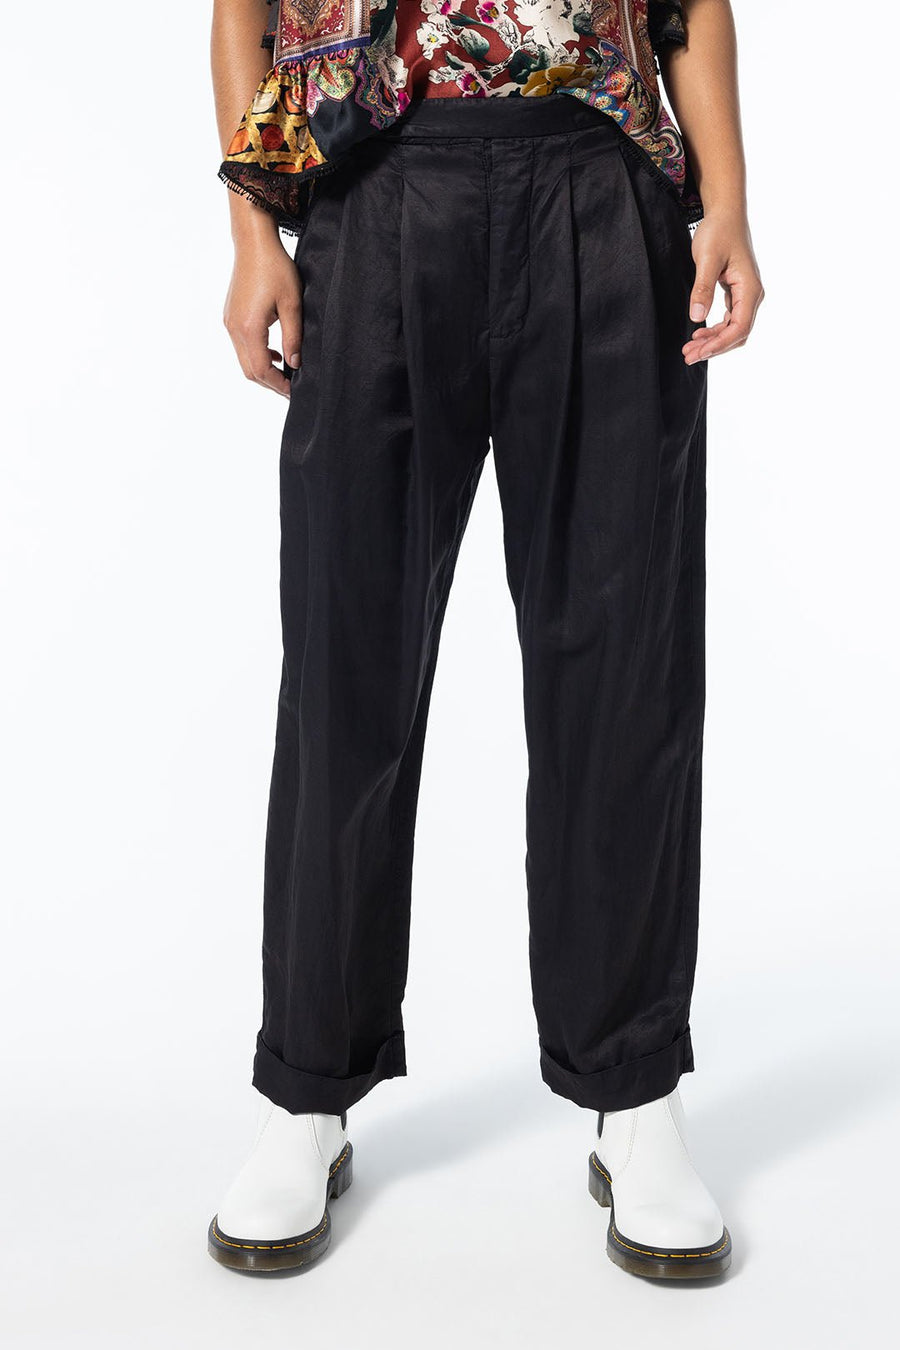 WALLACE TROUSERS, BLACK - Burning Torch Online Boutique